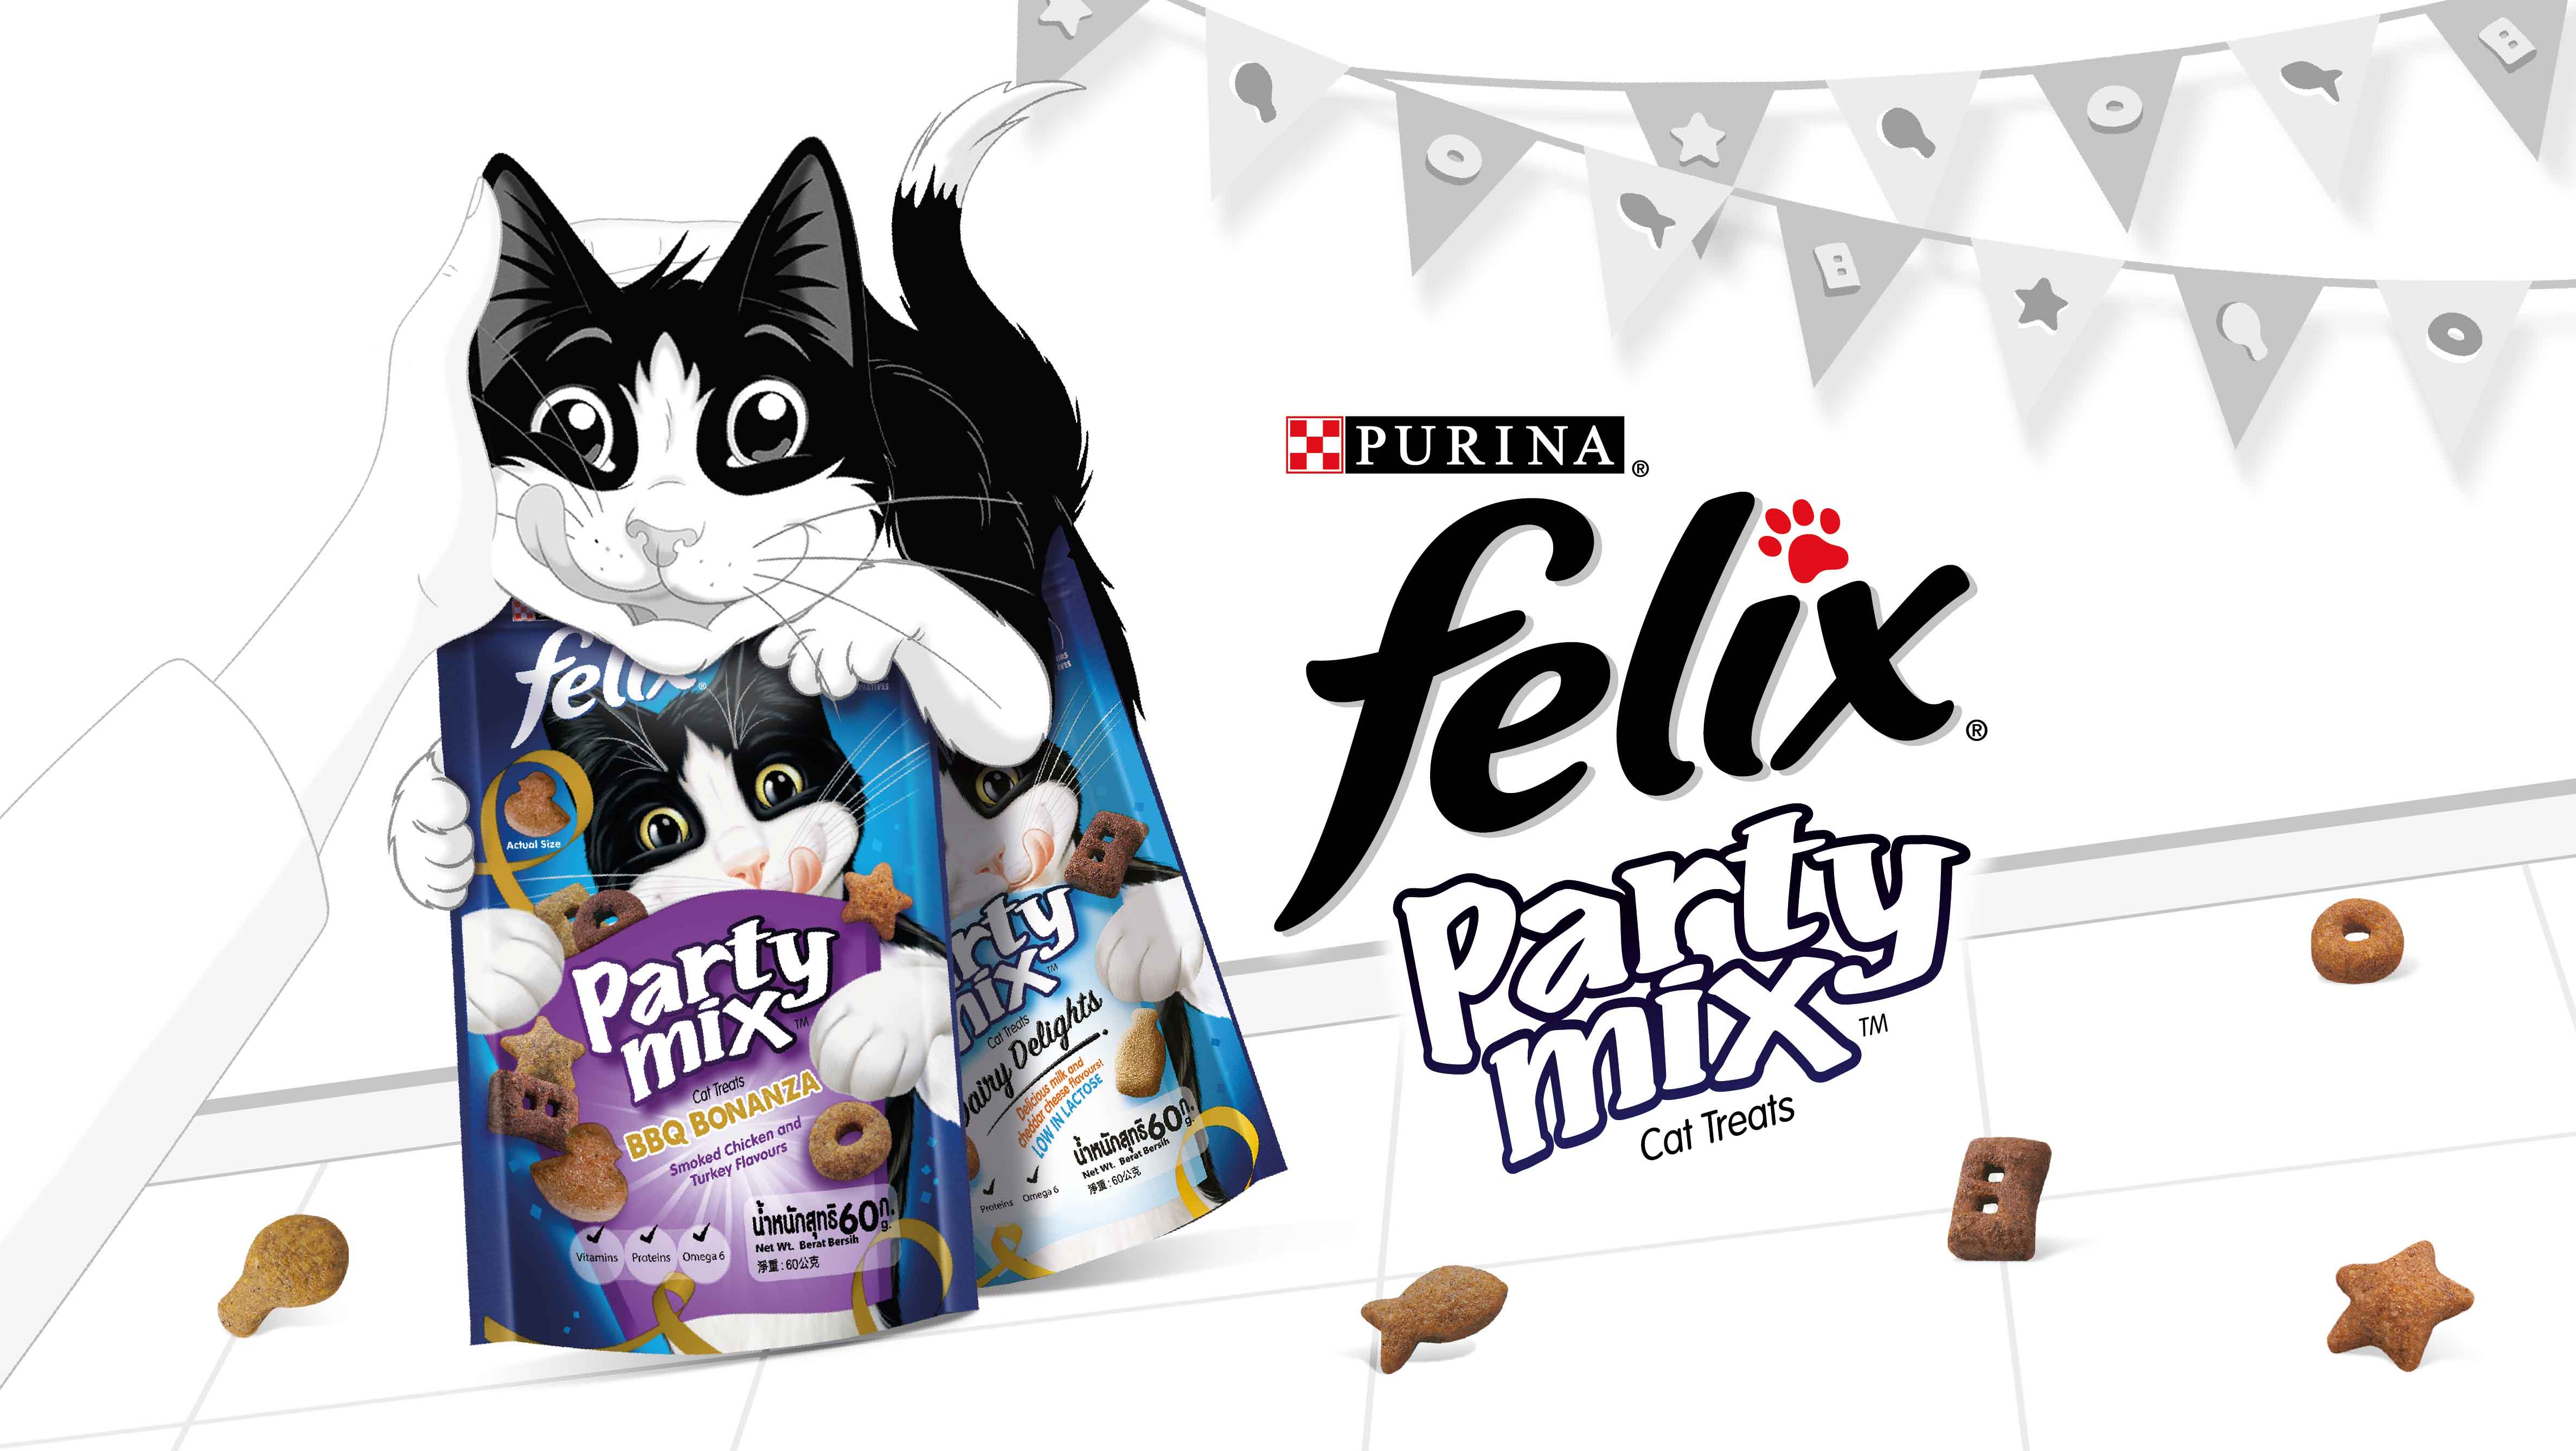 Felix the cat hugging 2 Felix Party Mix products on a white comical background